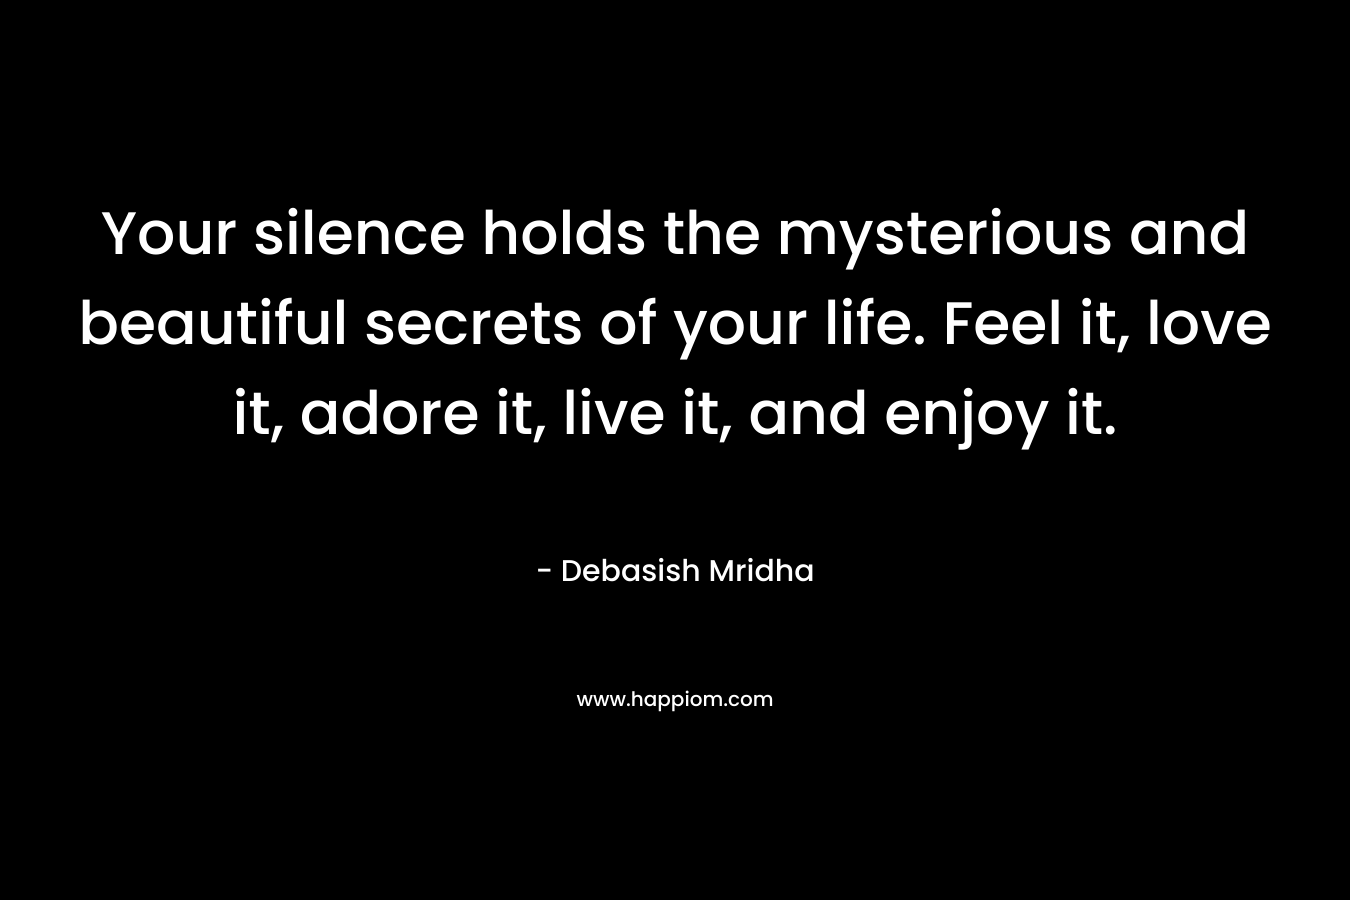 Your silence holds the mysterious and beautiful secrets of your life. Feel it, love it, adore it, live it, and enjoy it.